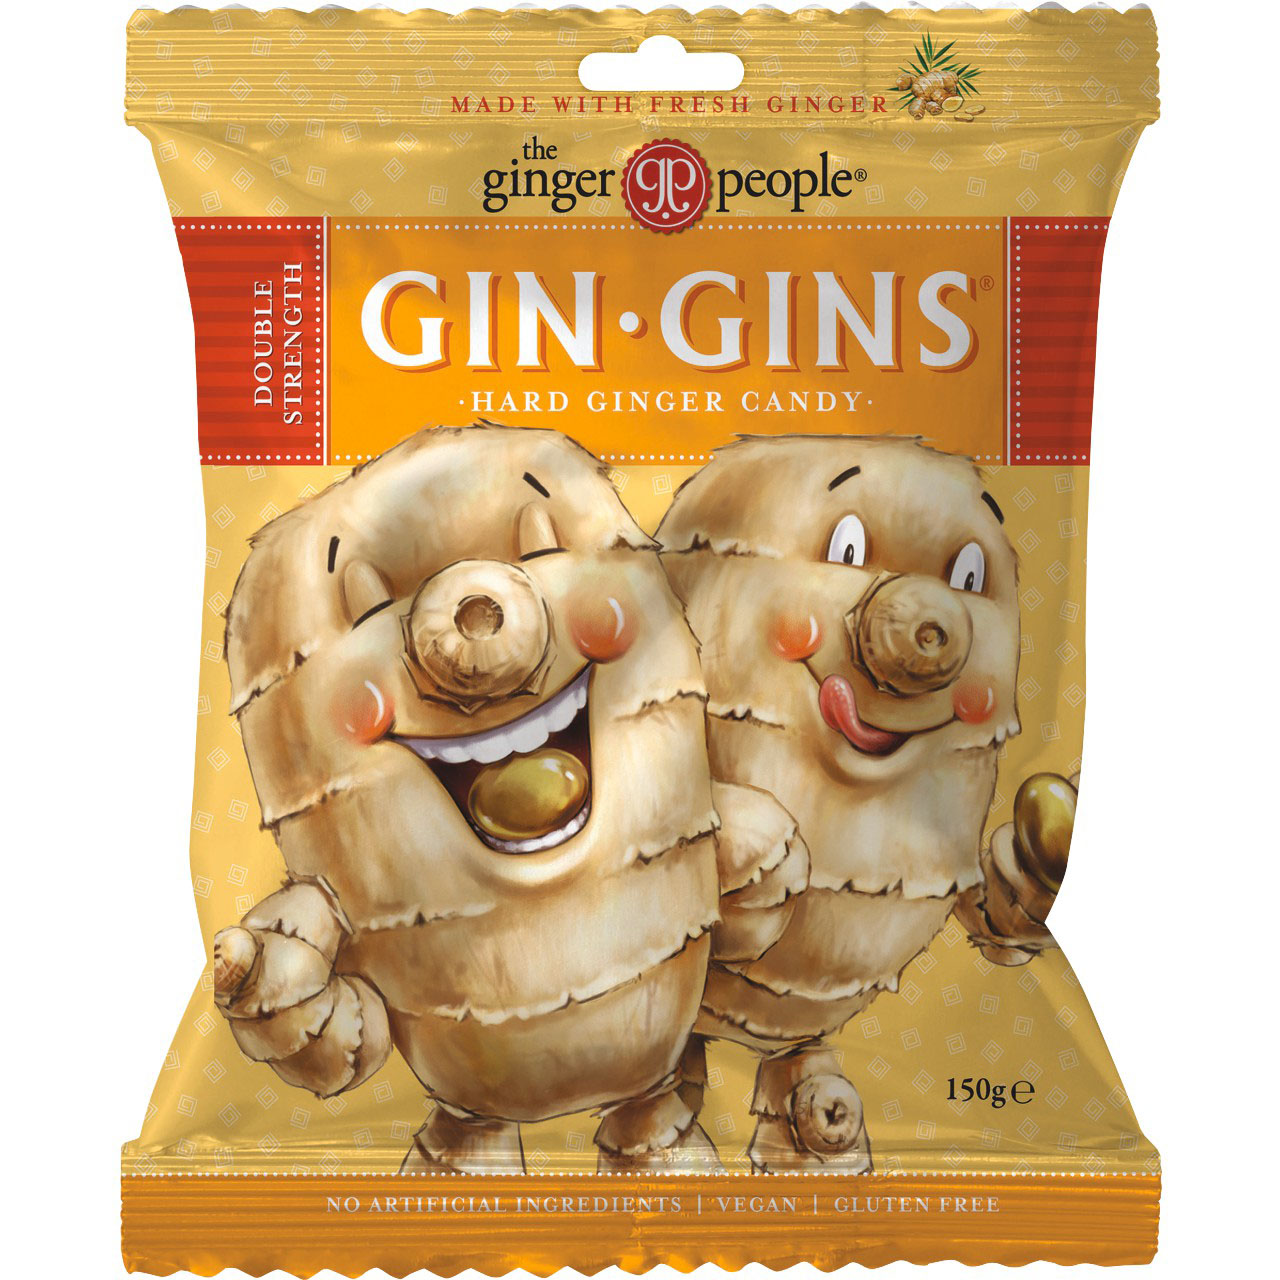 Gin Gins® Hard Ginger Candy Sweets - 3 x 150g